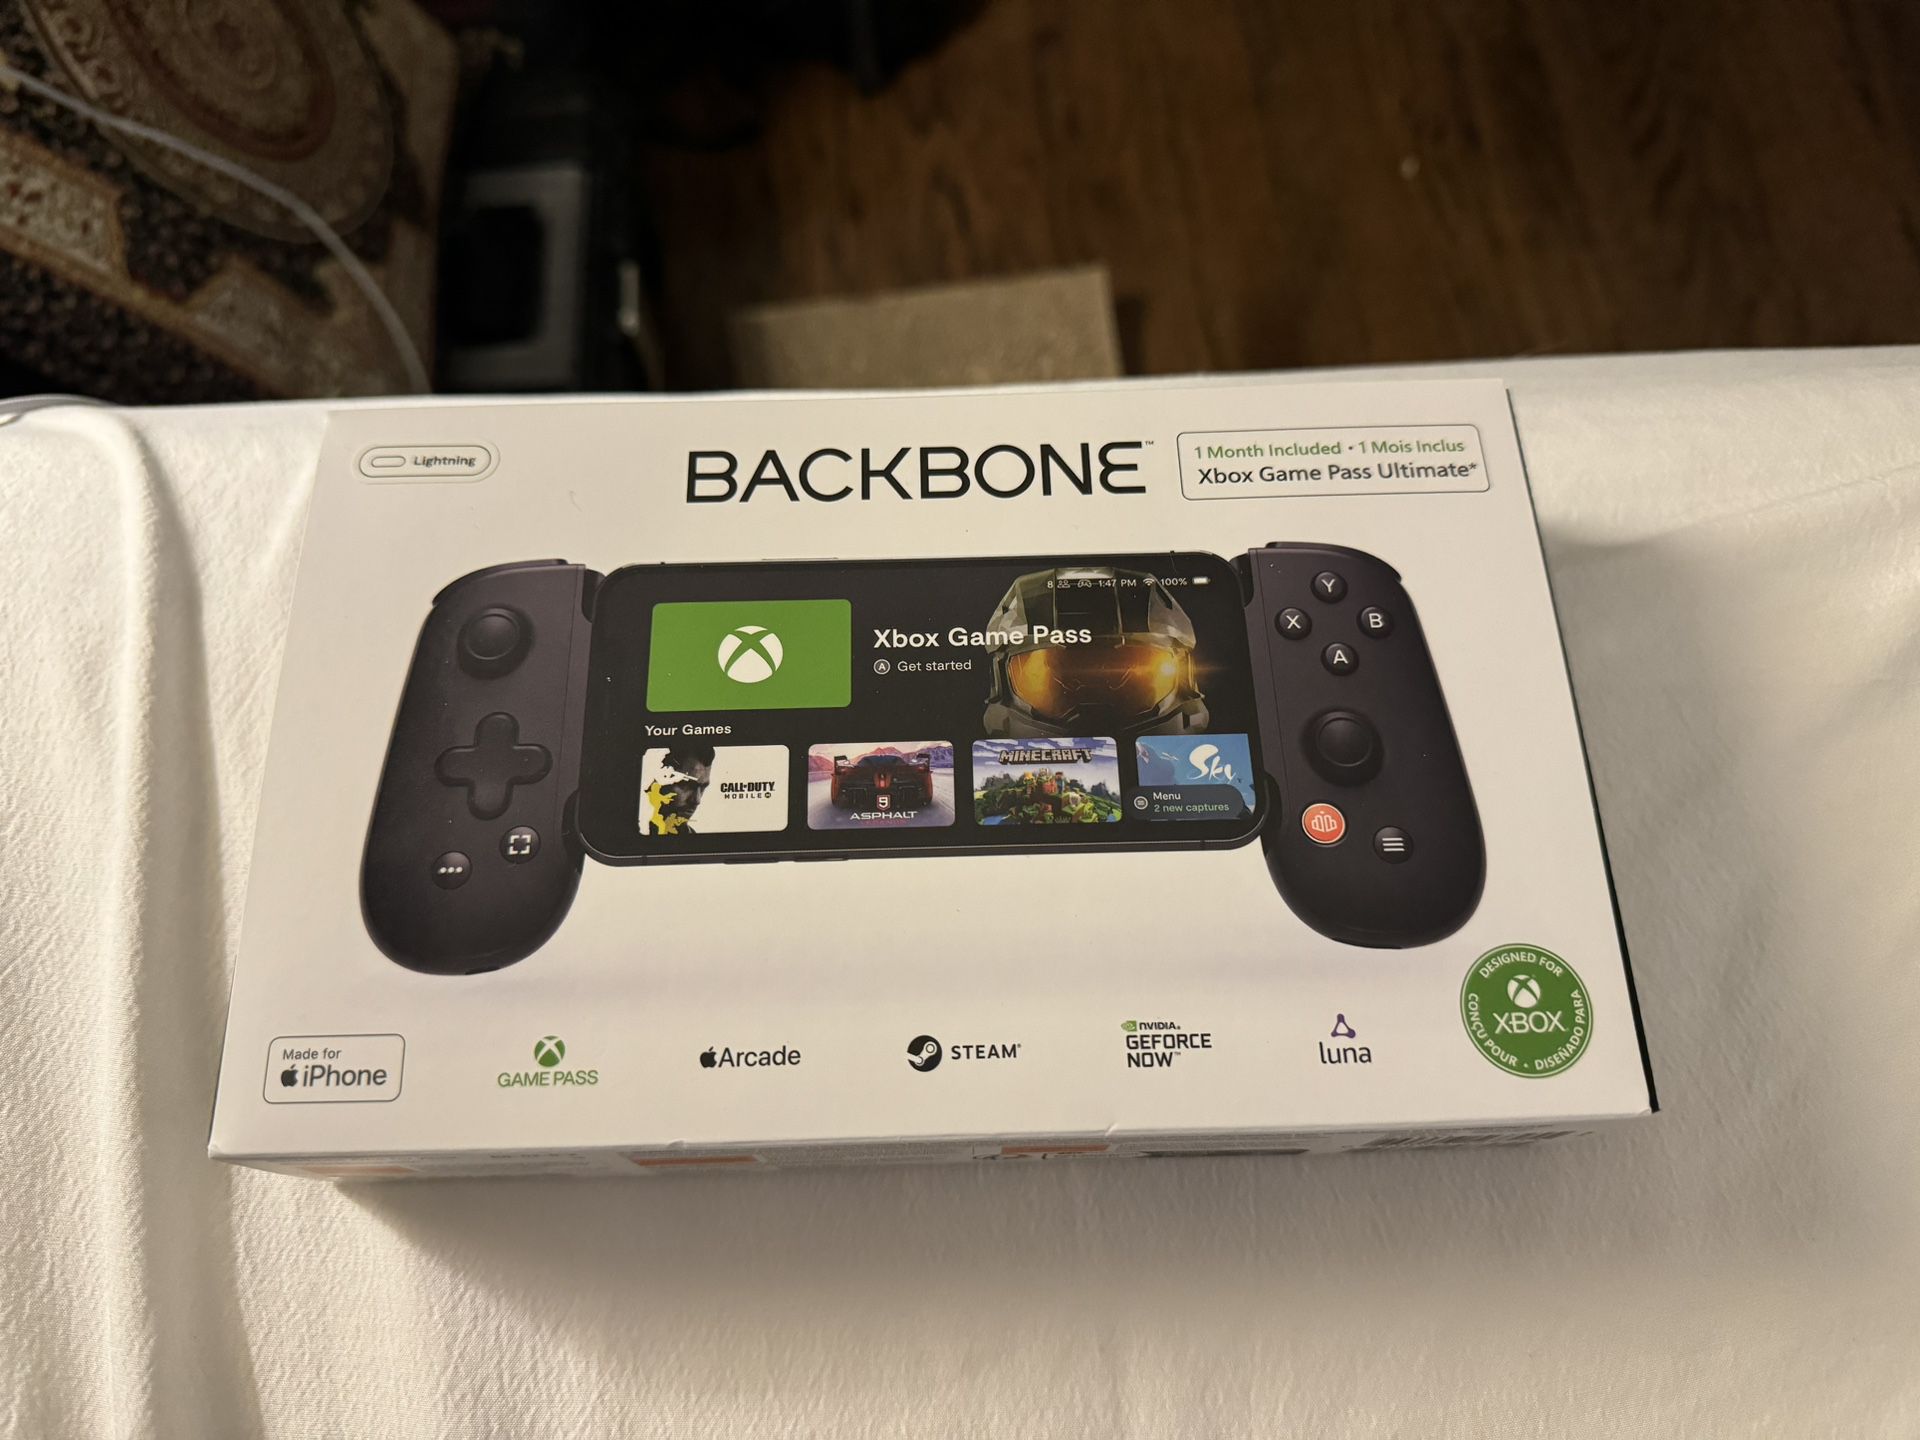 Backbone For iPhone With Xbox Game Pass Ultimate